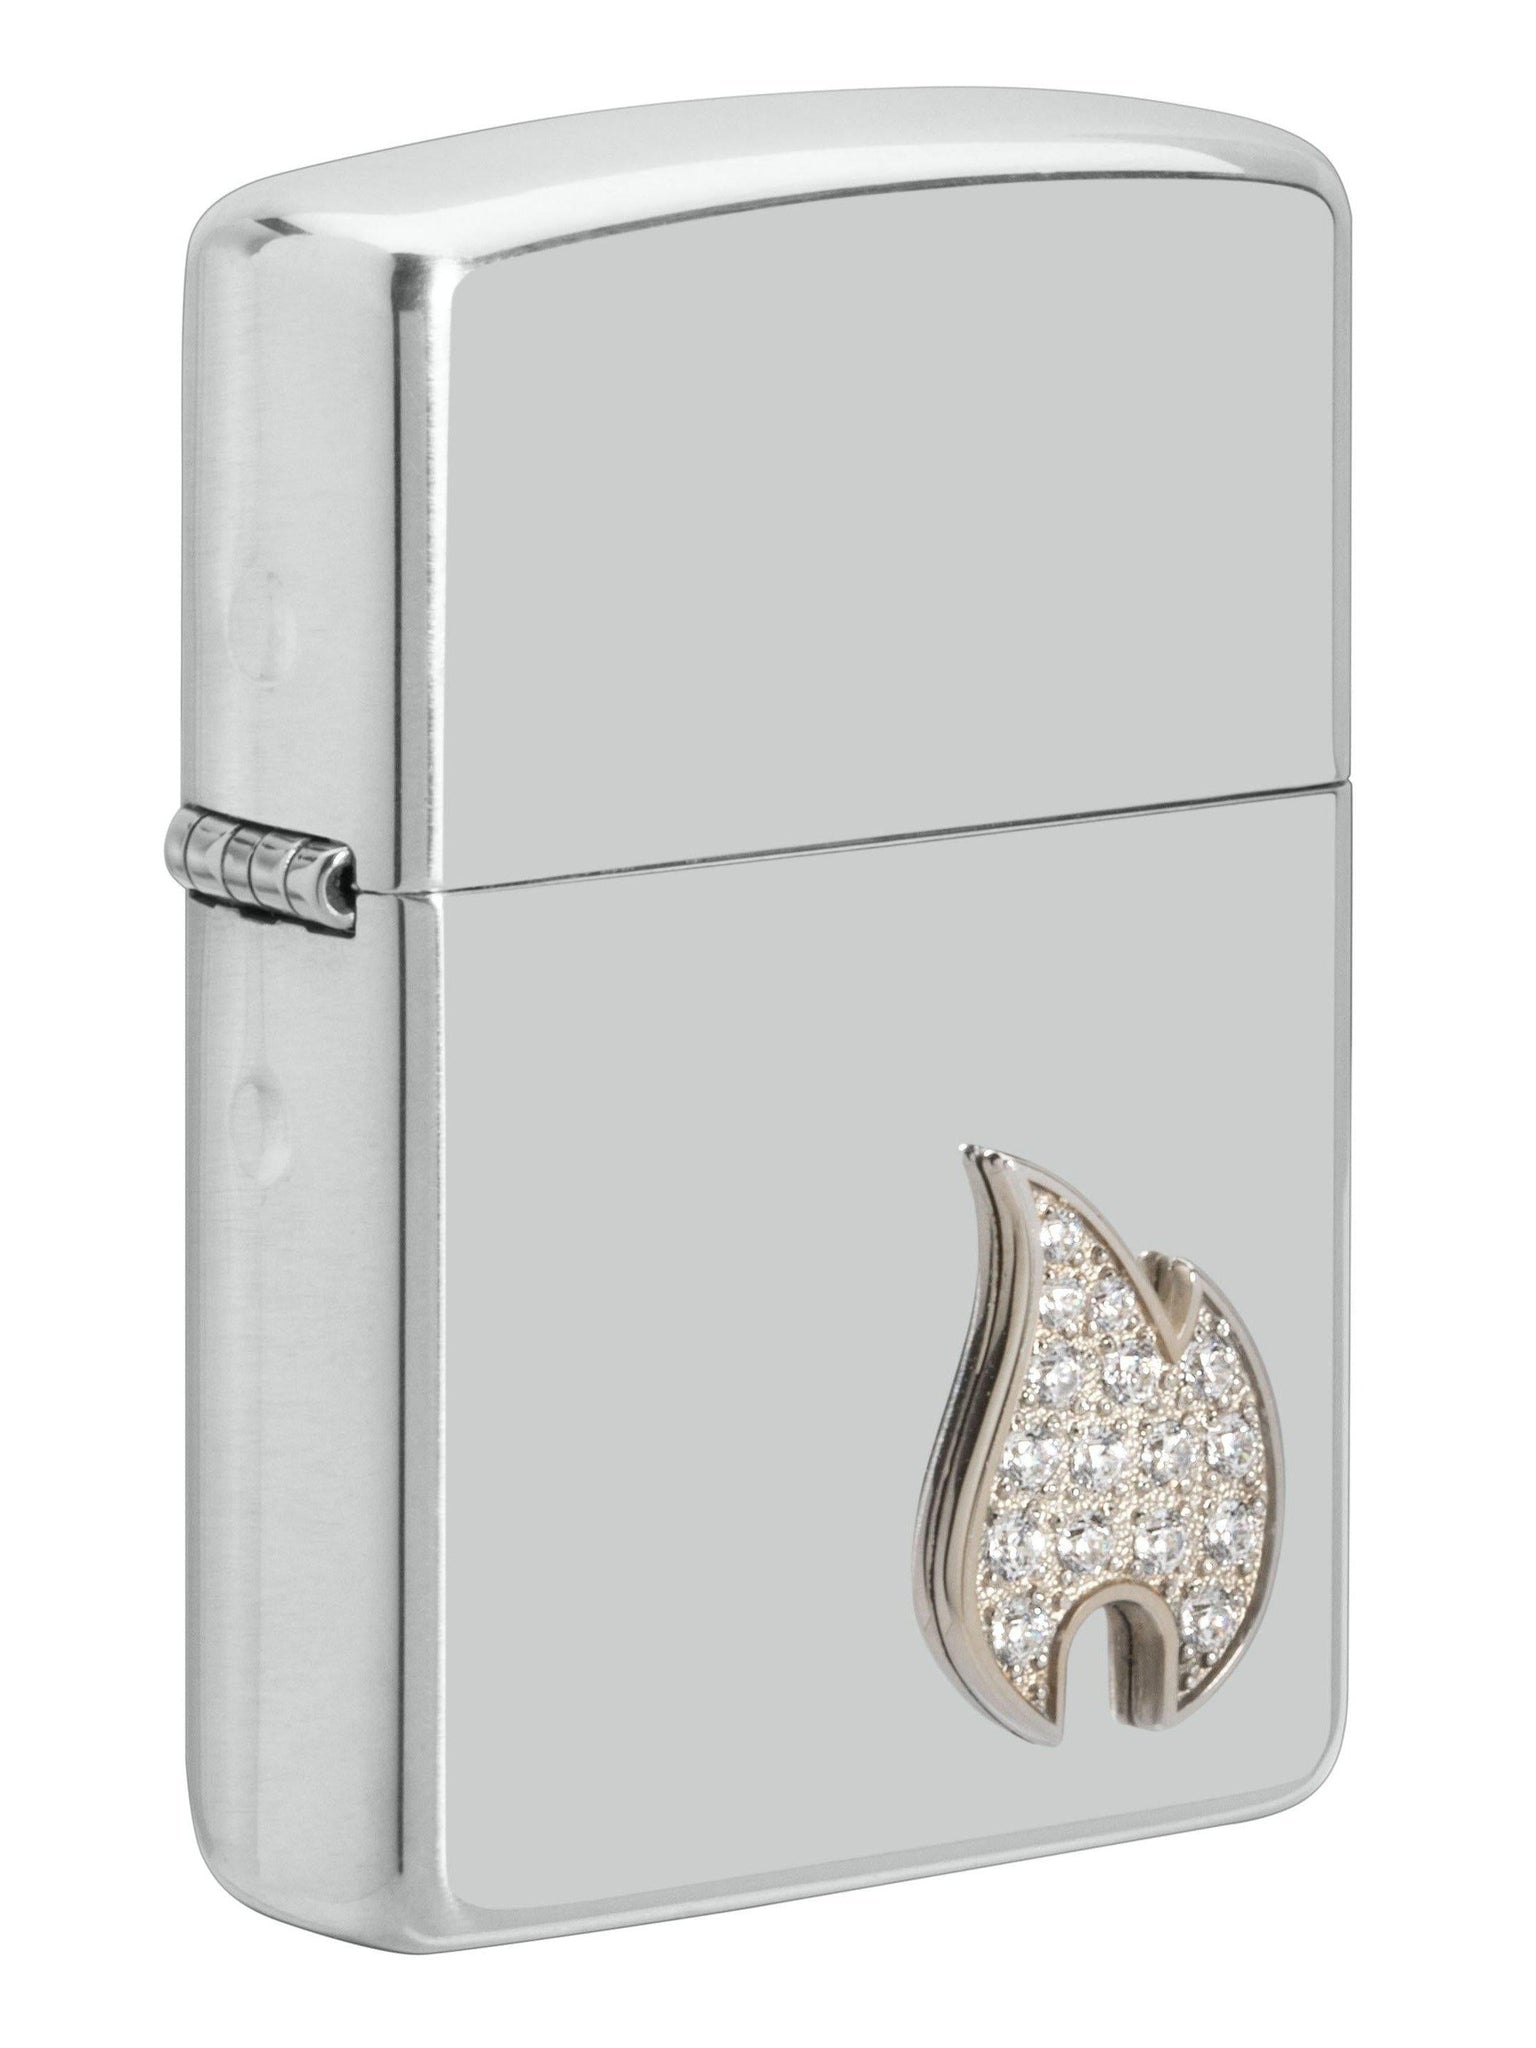 Zippo Lighter: Sterling Silver with Flame Emblem, Armor - High Polish 49554